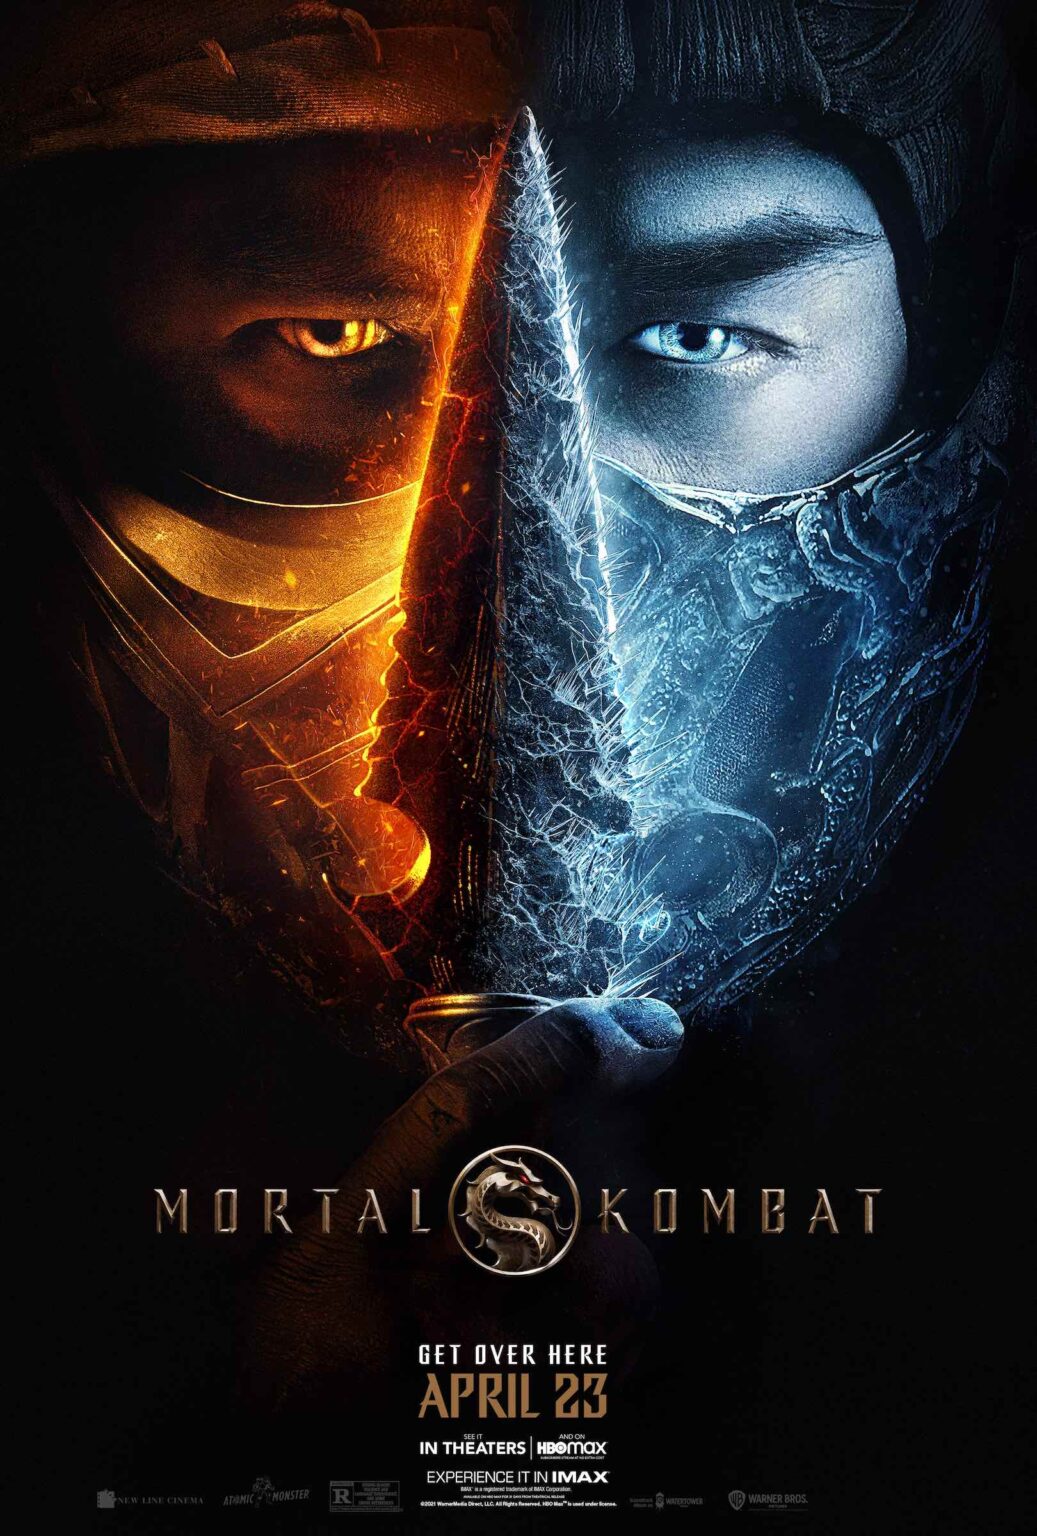 The new Mortal Kombat film has been released and fans are opinionated. Grab your black belts and dive into the reactions to the new Mortal Kombat movie